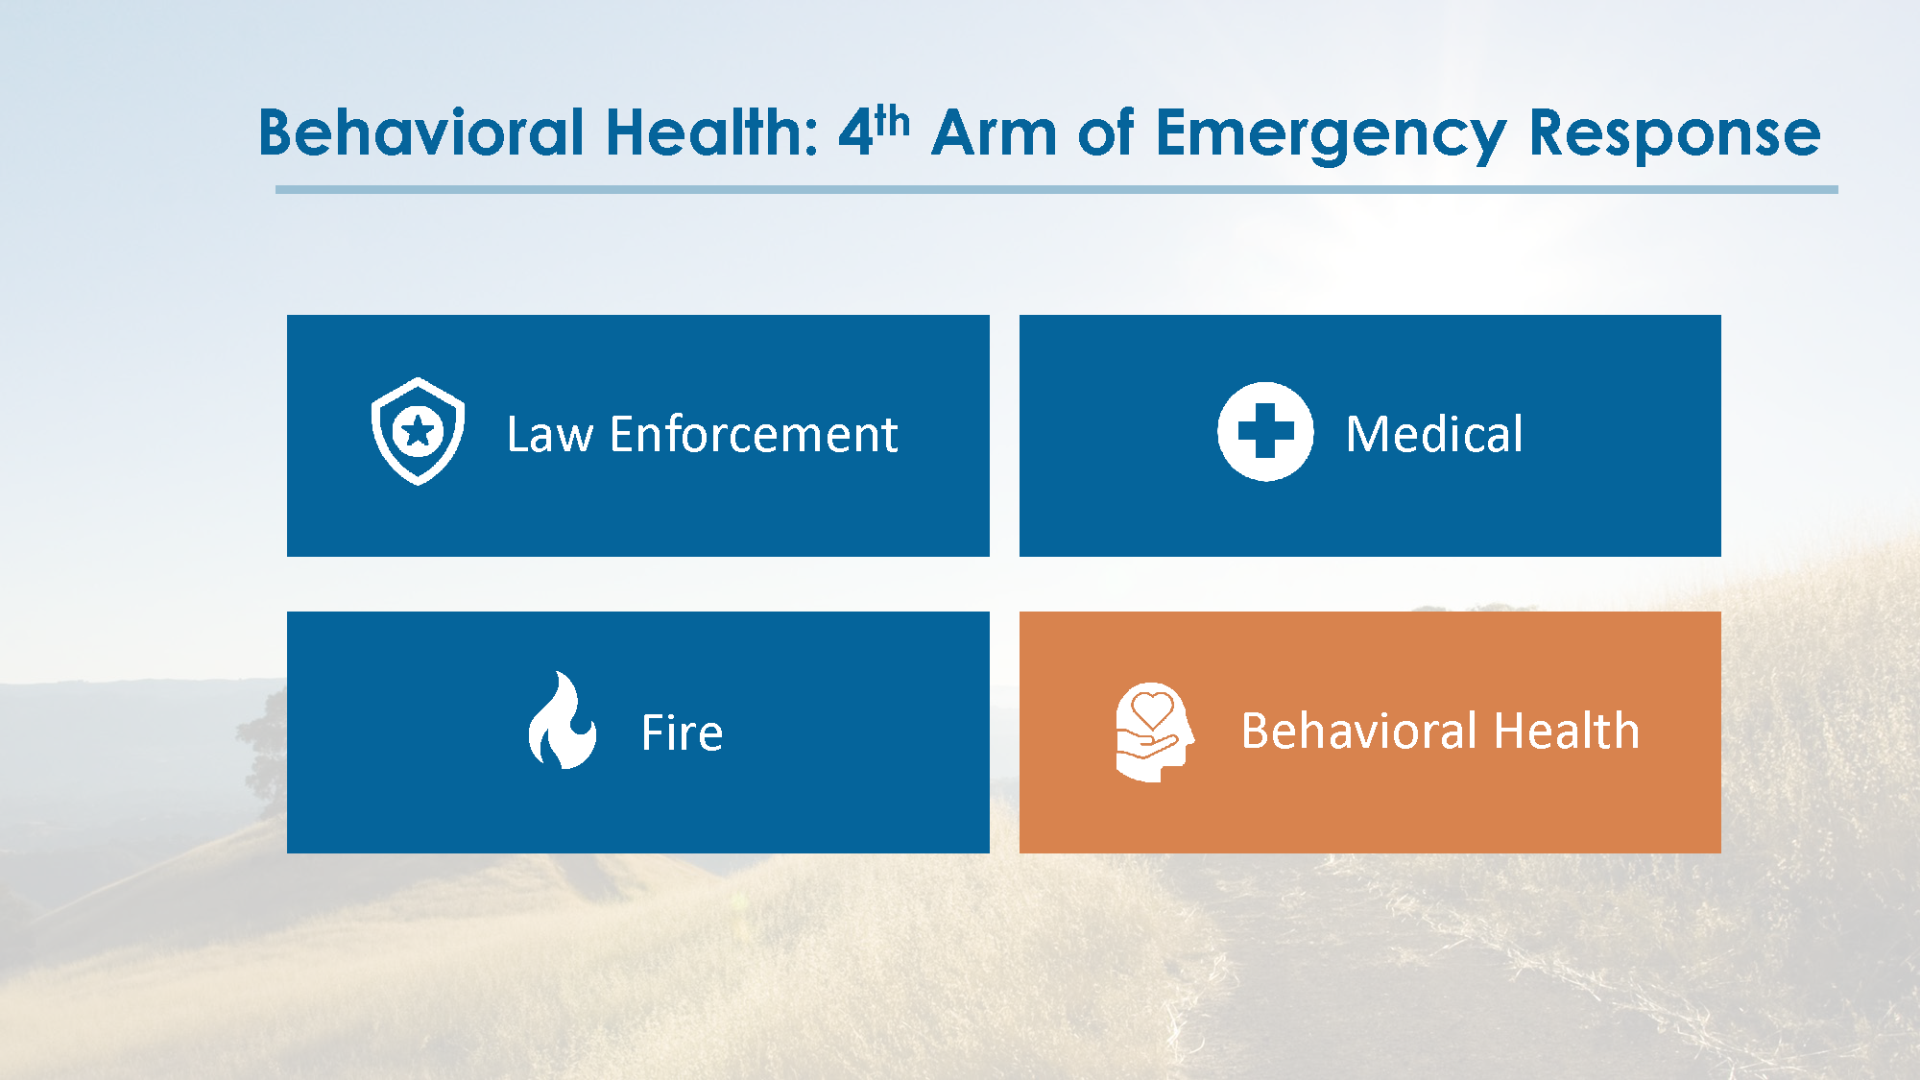 Behavioral Health, the 4th arm of Emergency Response